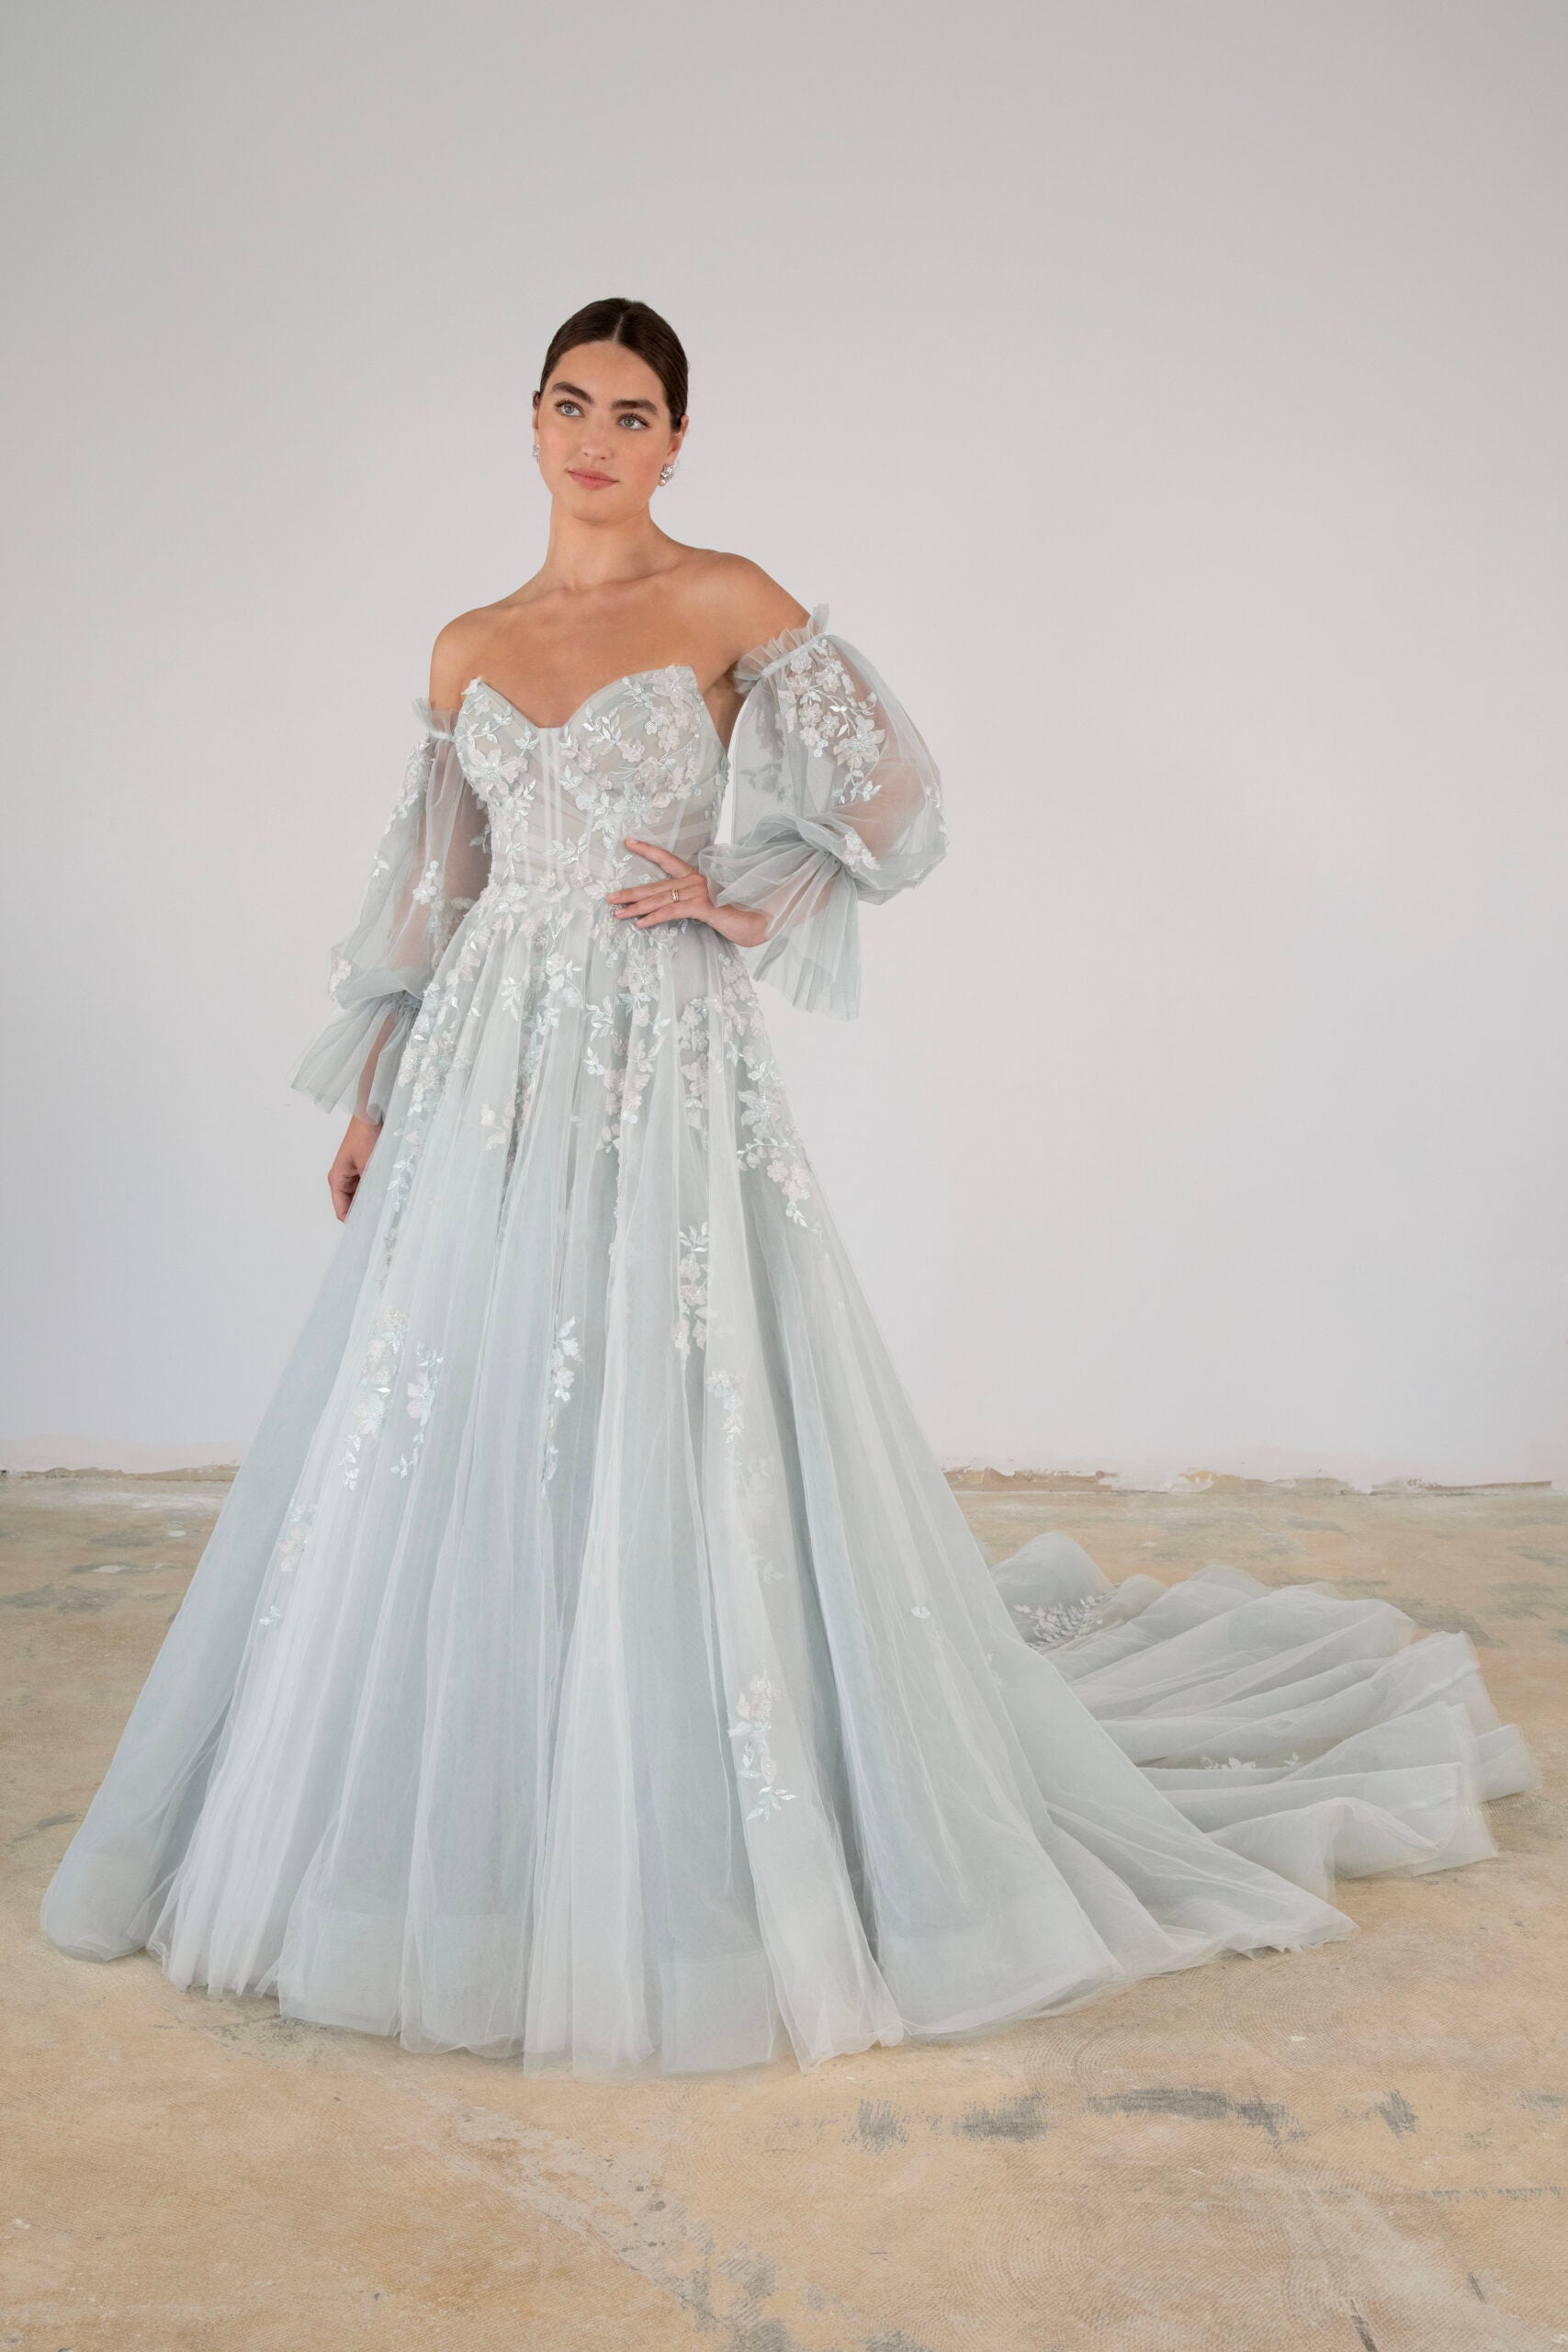 Blue Tulle Ball Gown With Detachable Sleeves by Martina Liana Luxe - Image 1